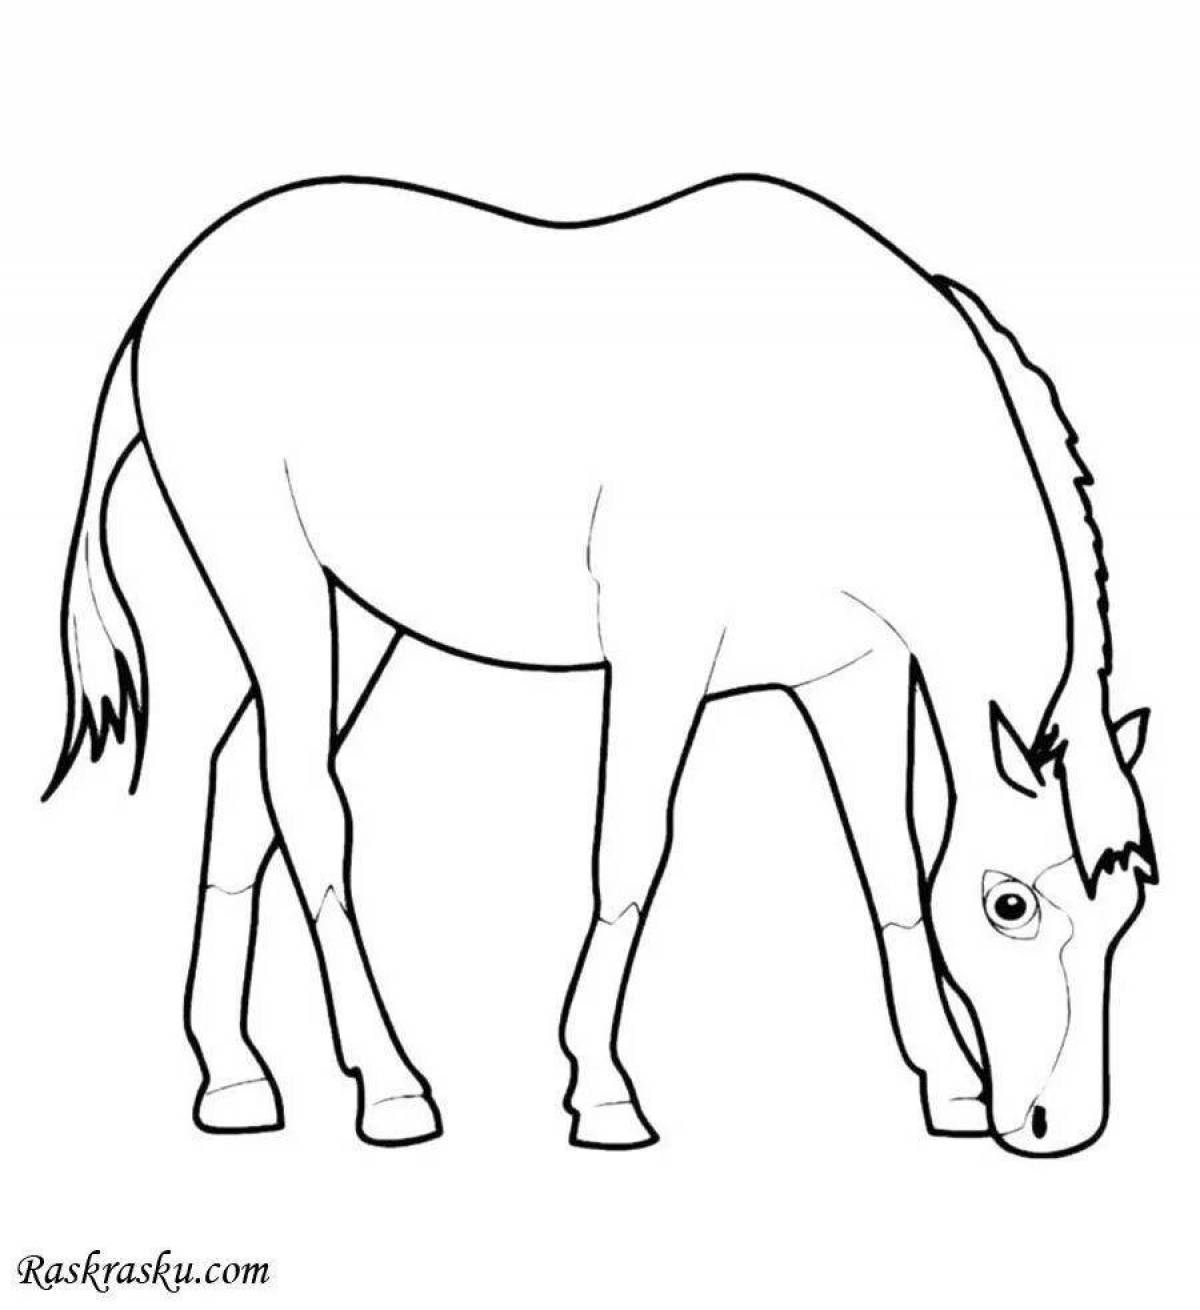 Color-frenzy horse coloring page for children 2-3 years old